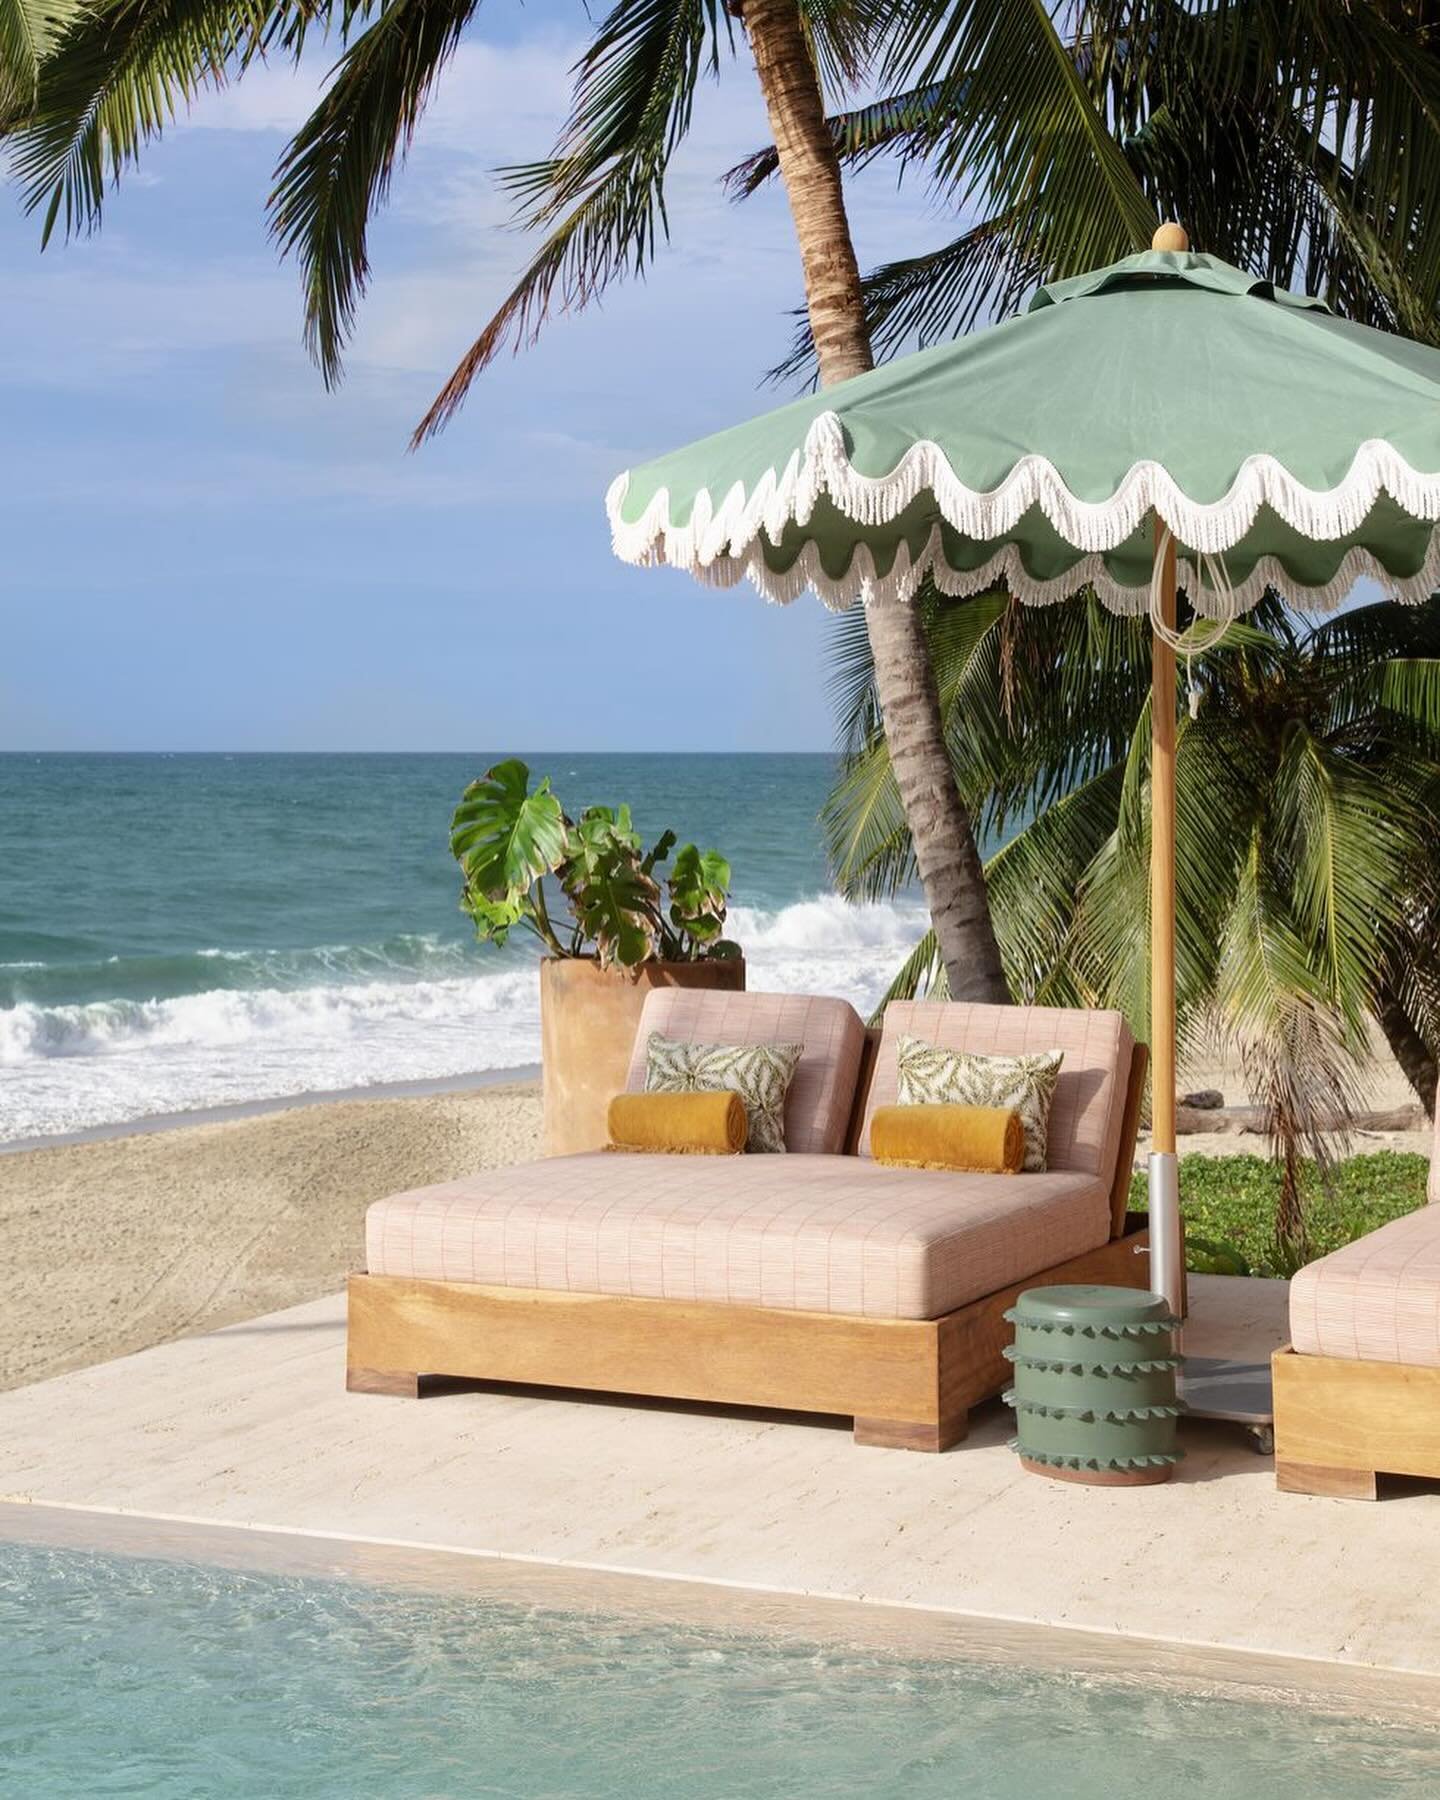 When it came time for designer @summerthorntondesign to select outdoor fabrics for Casa Rosada, her gorgeous new home in Sayulita, Mexico, she needed something durable that would compliment the natural surroundings. She landed on performance fabric f